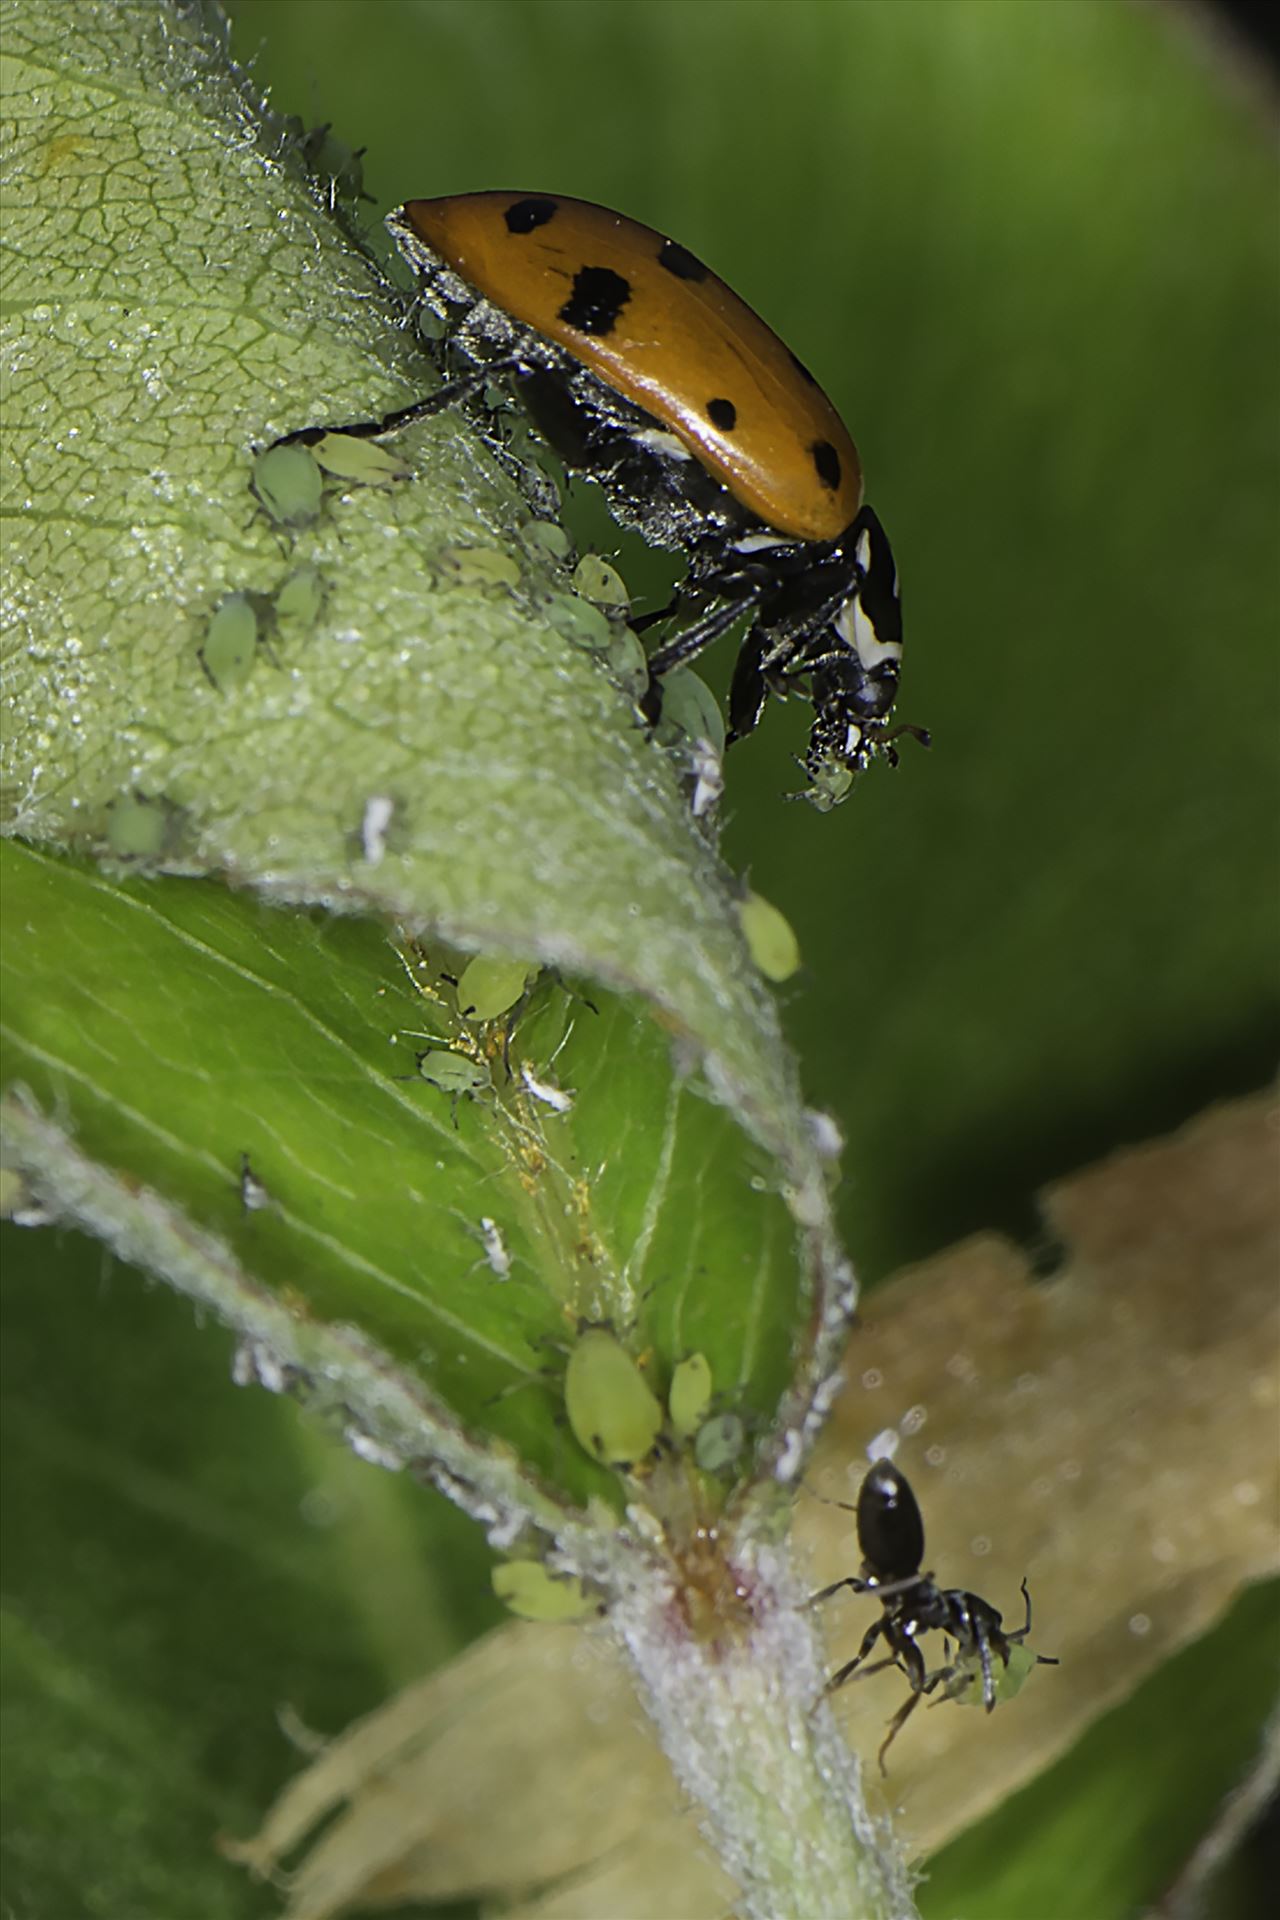 Drama in the Garden - Ladybug eats aphid while ant protects other aphids by Denise Buckley Crawford